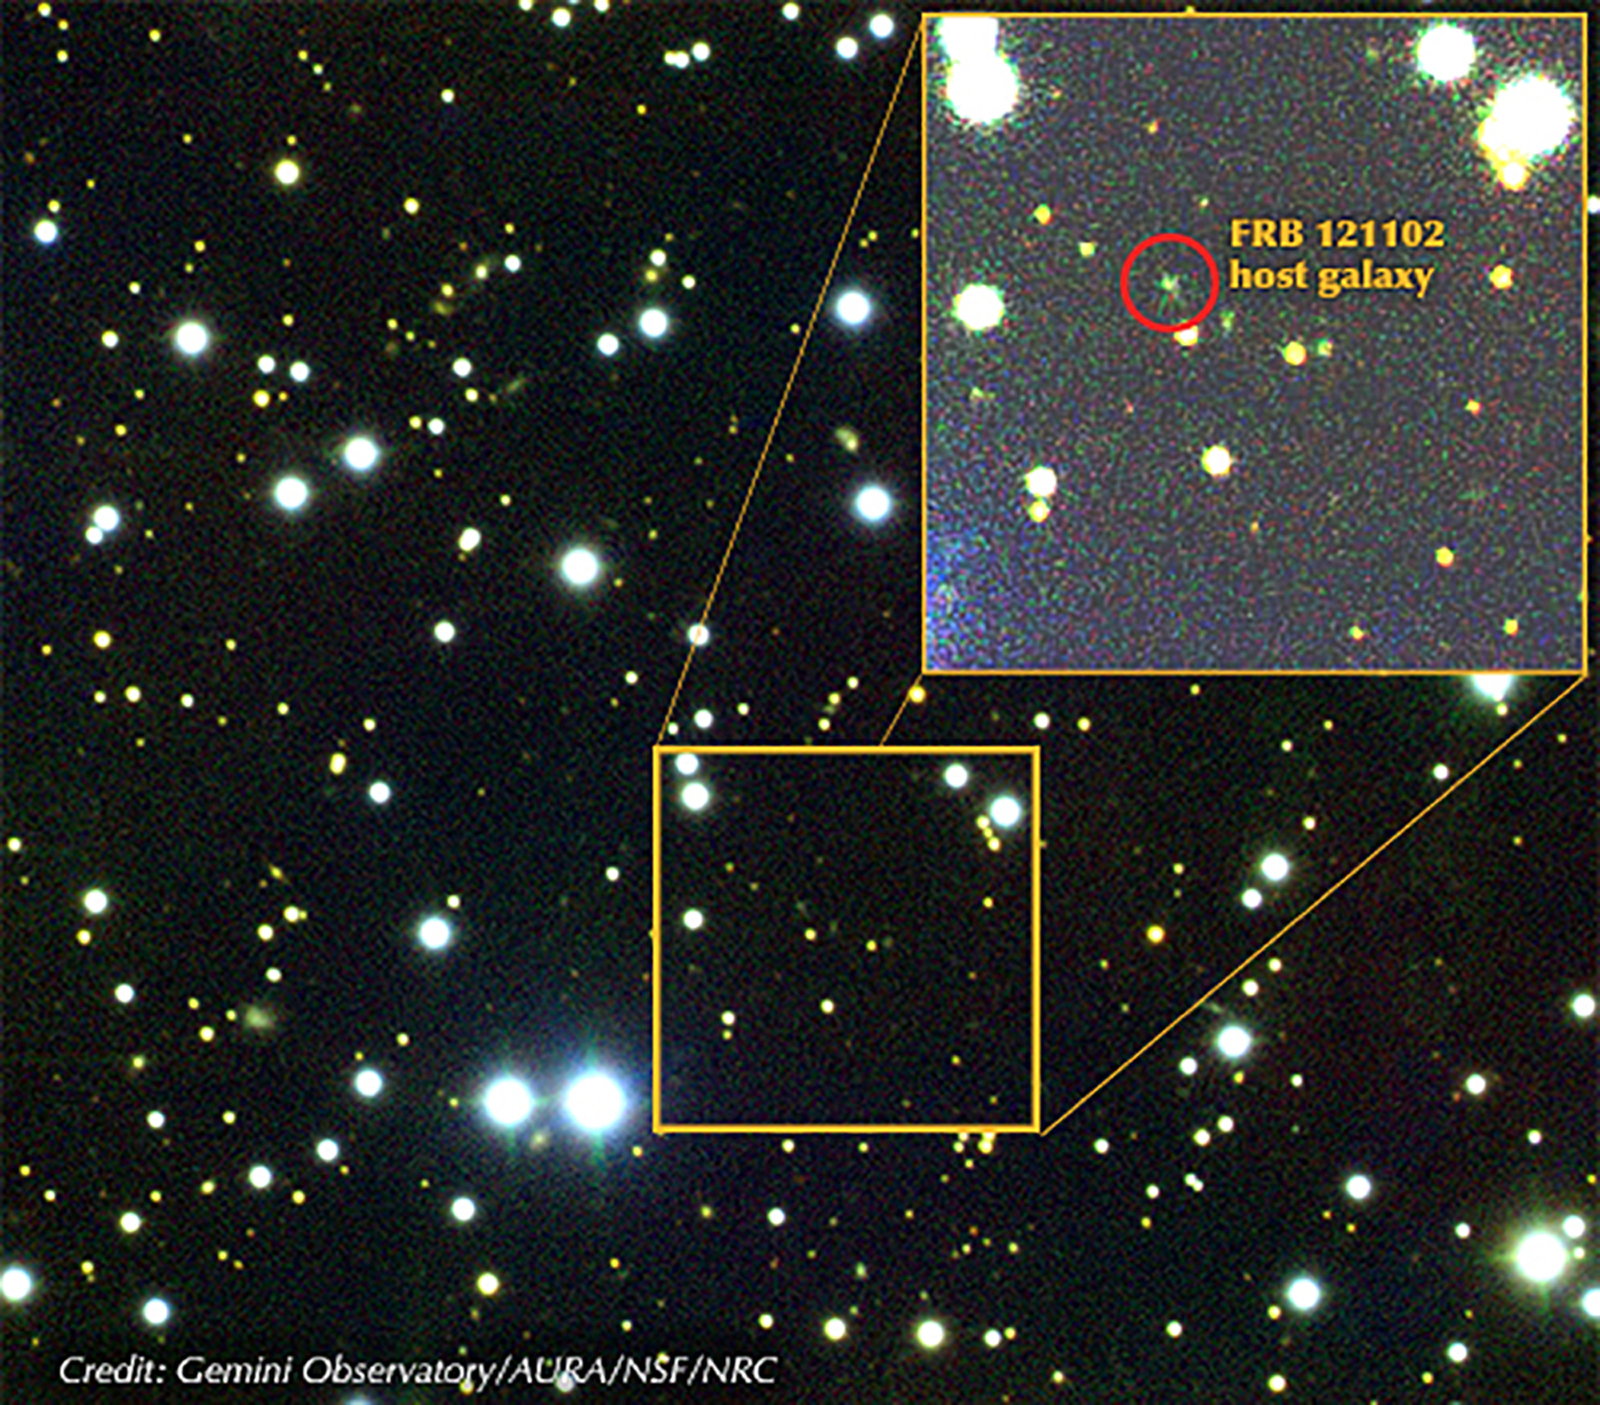 The location of the dwarf galaxy sending out fast radio bursts